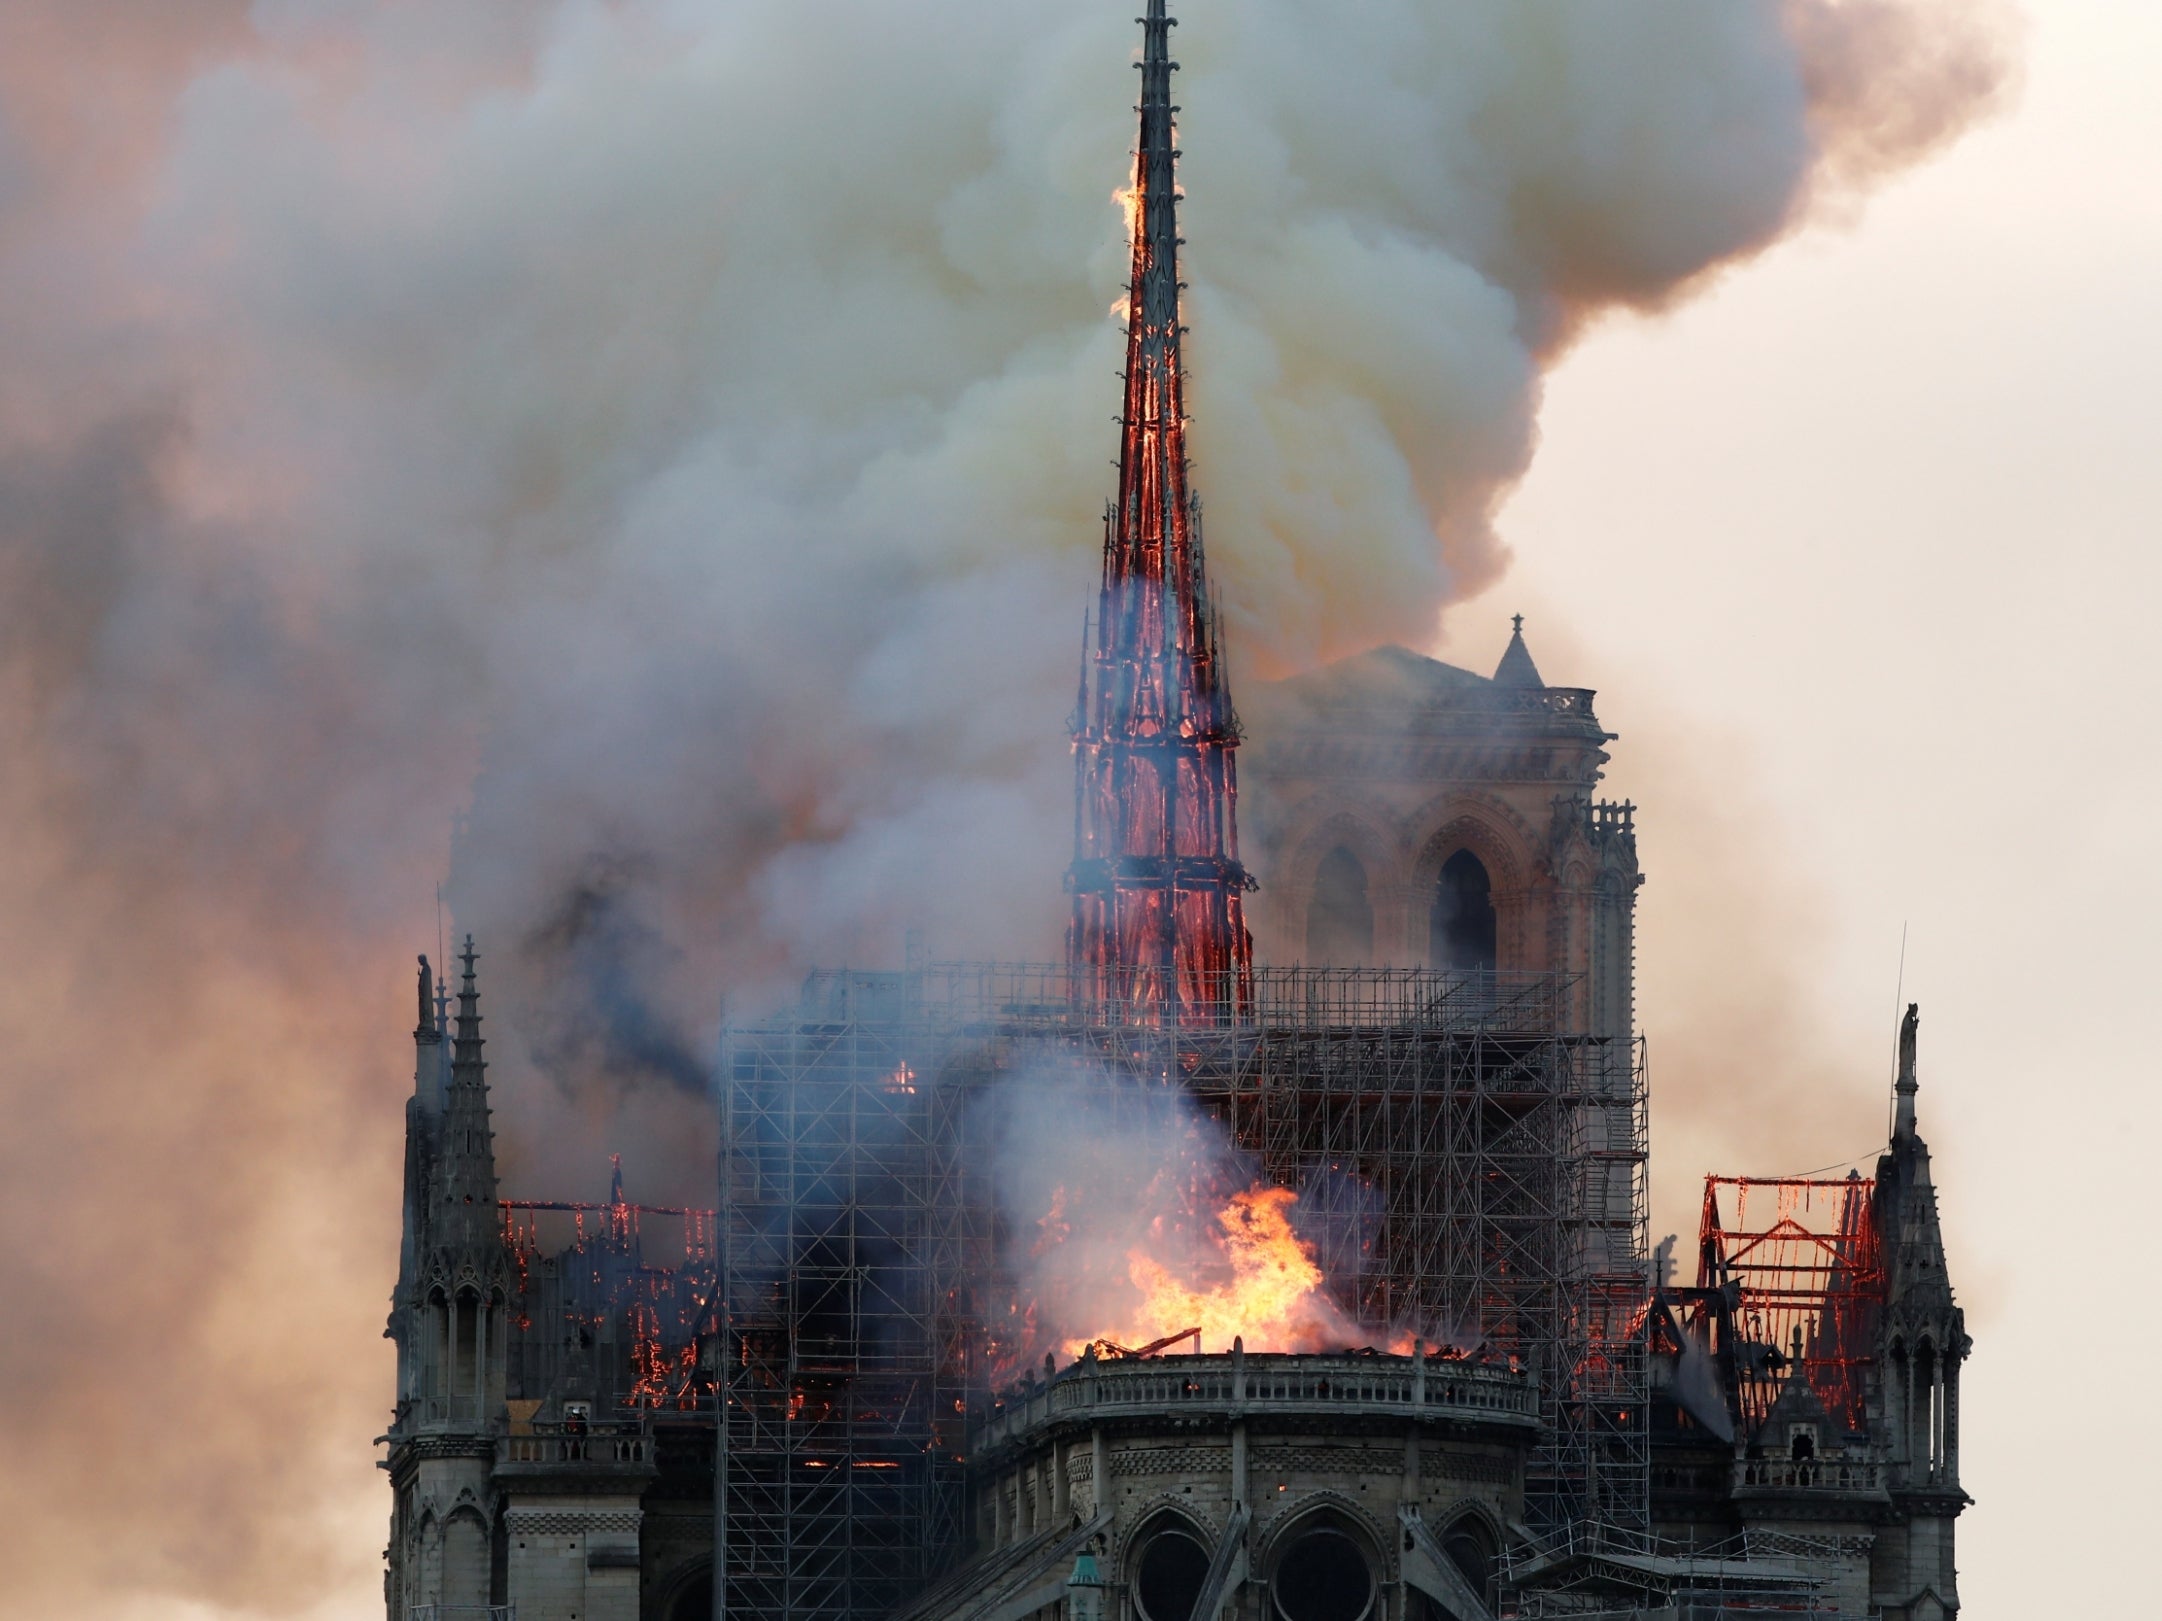 Notre Dame cathedral fire: One firefighter seriously injured in Paris blaze, officials say